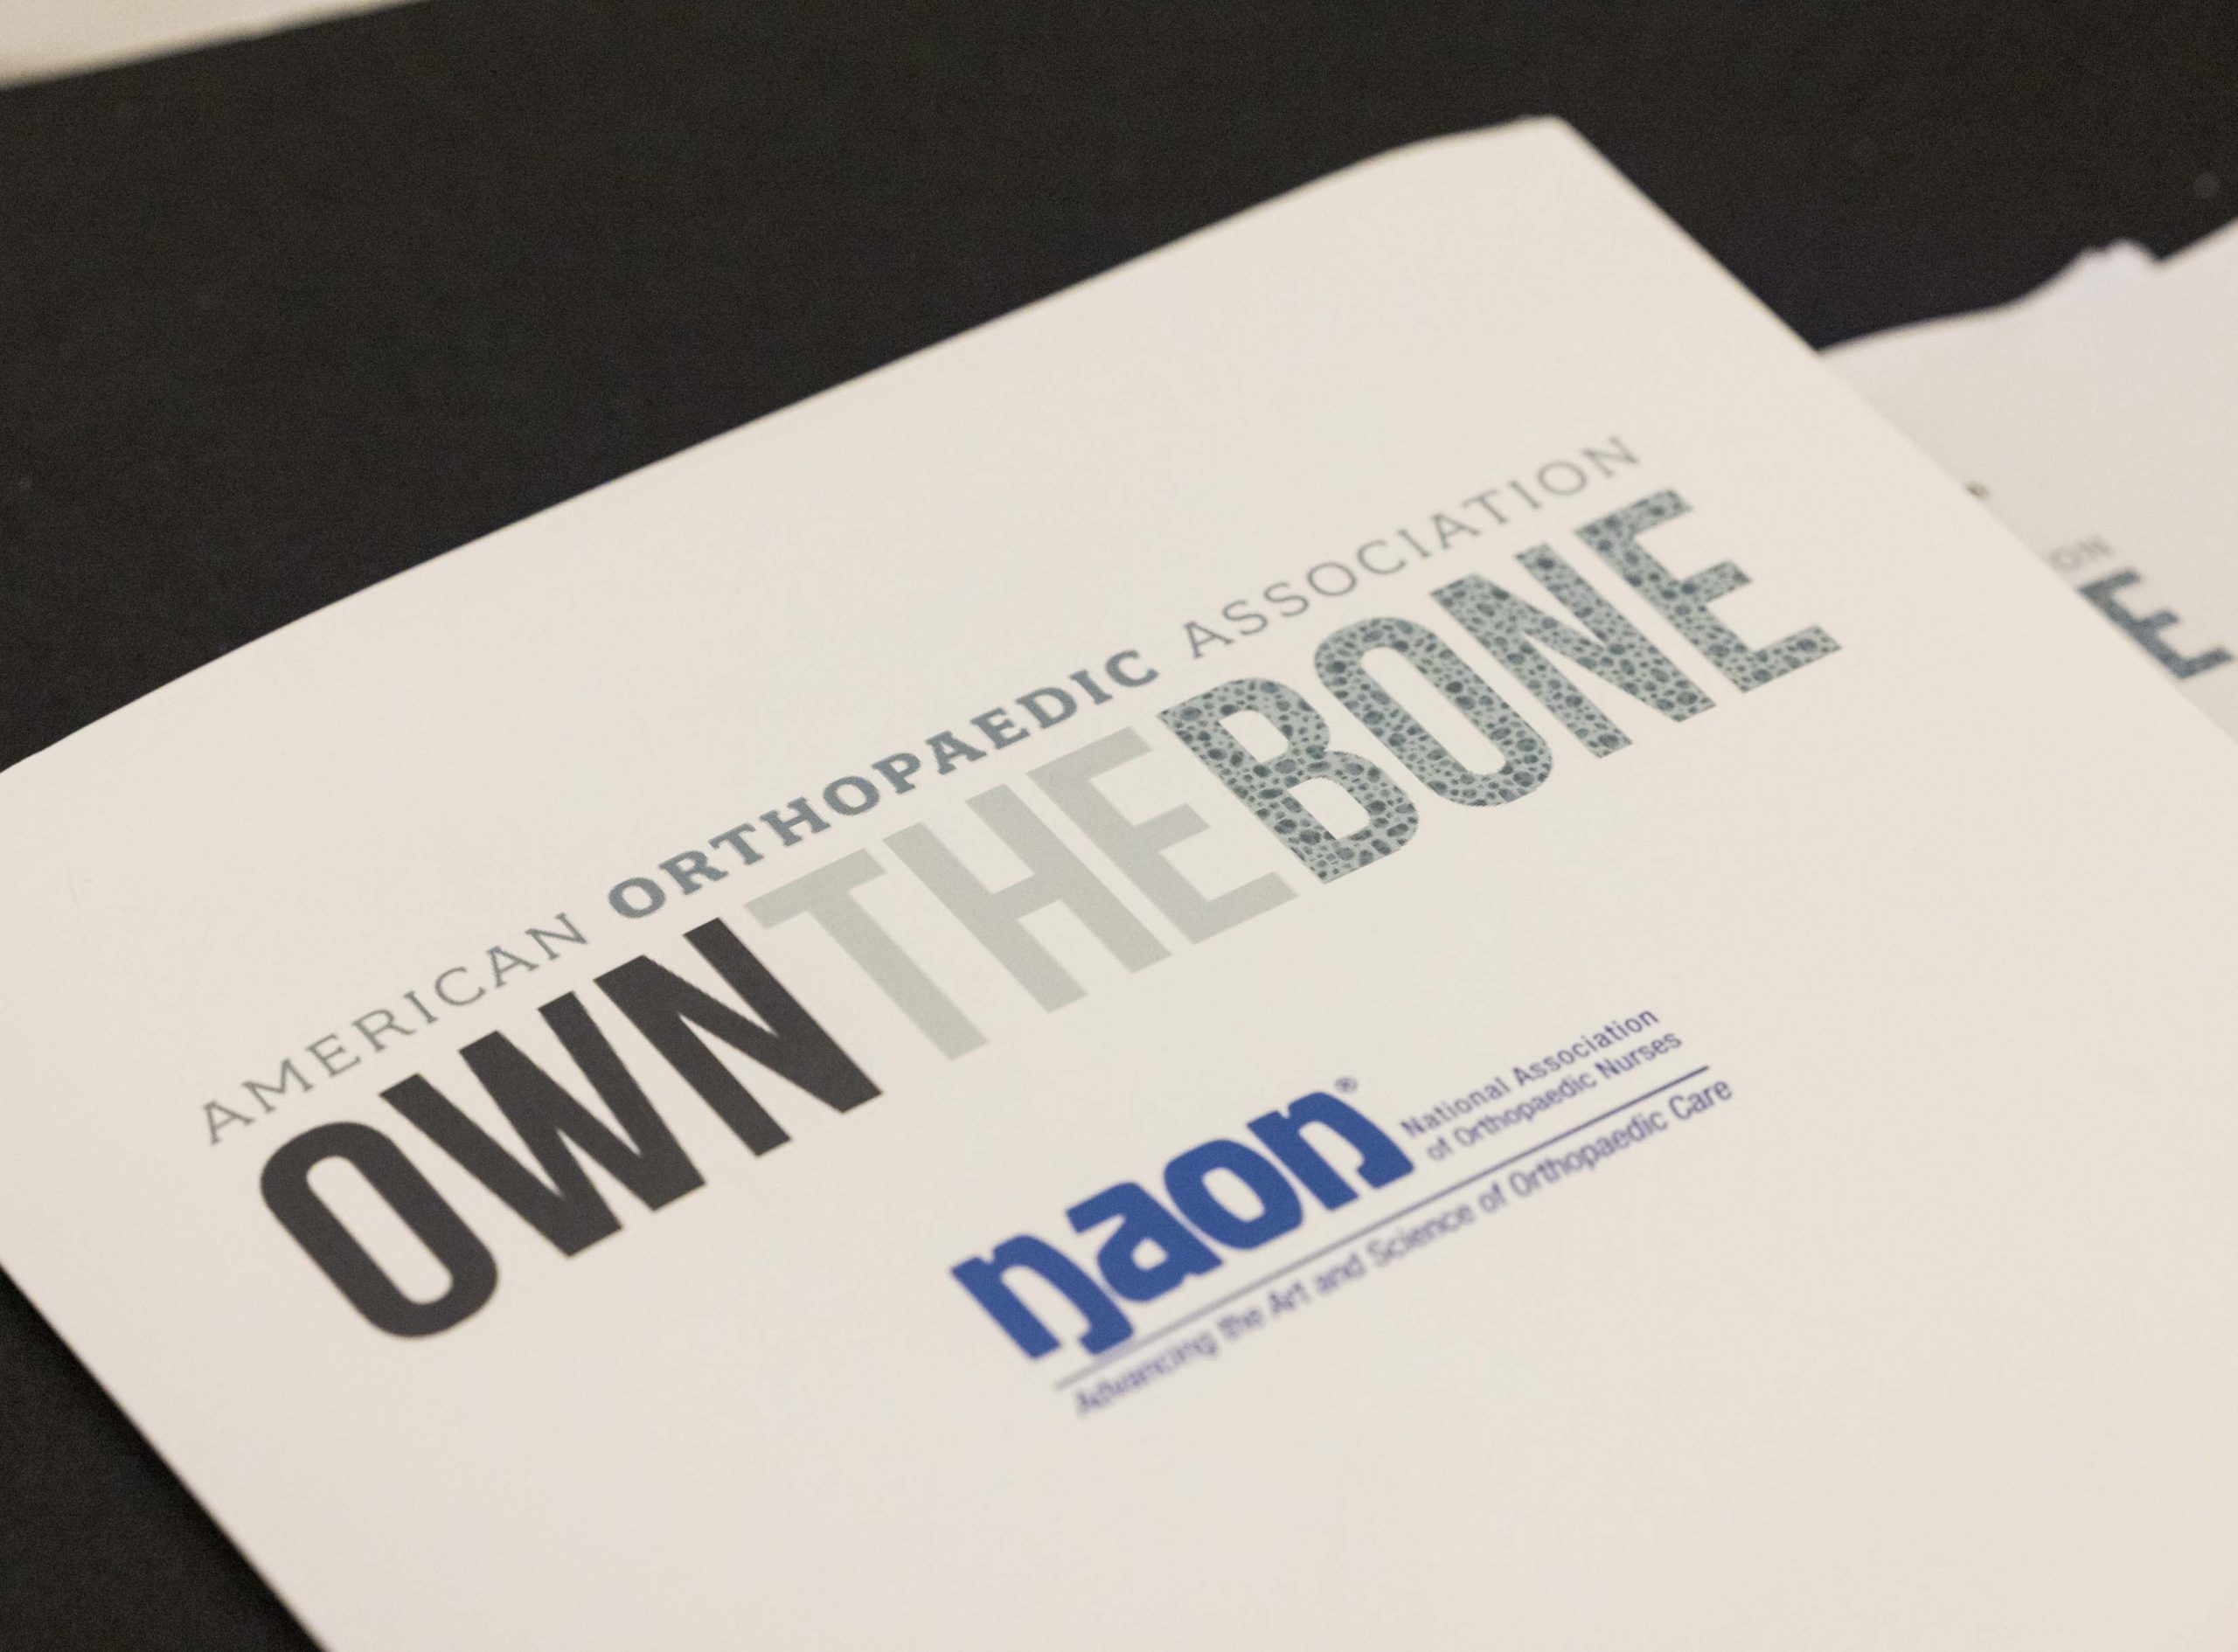 Learn More About Own the Bone